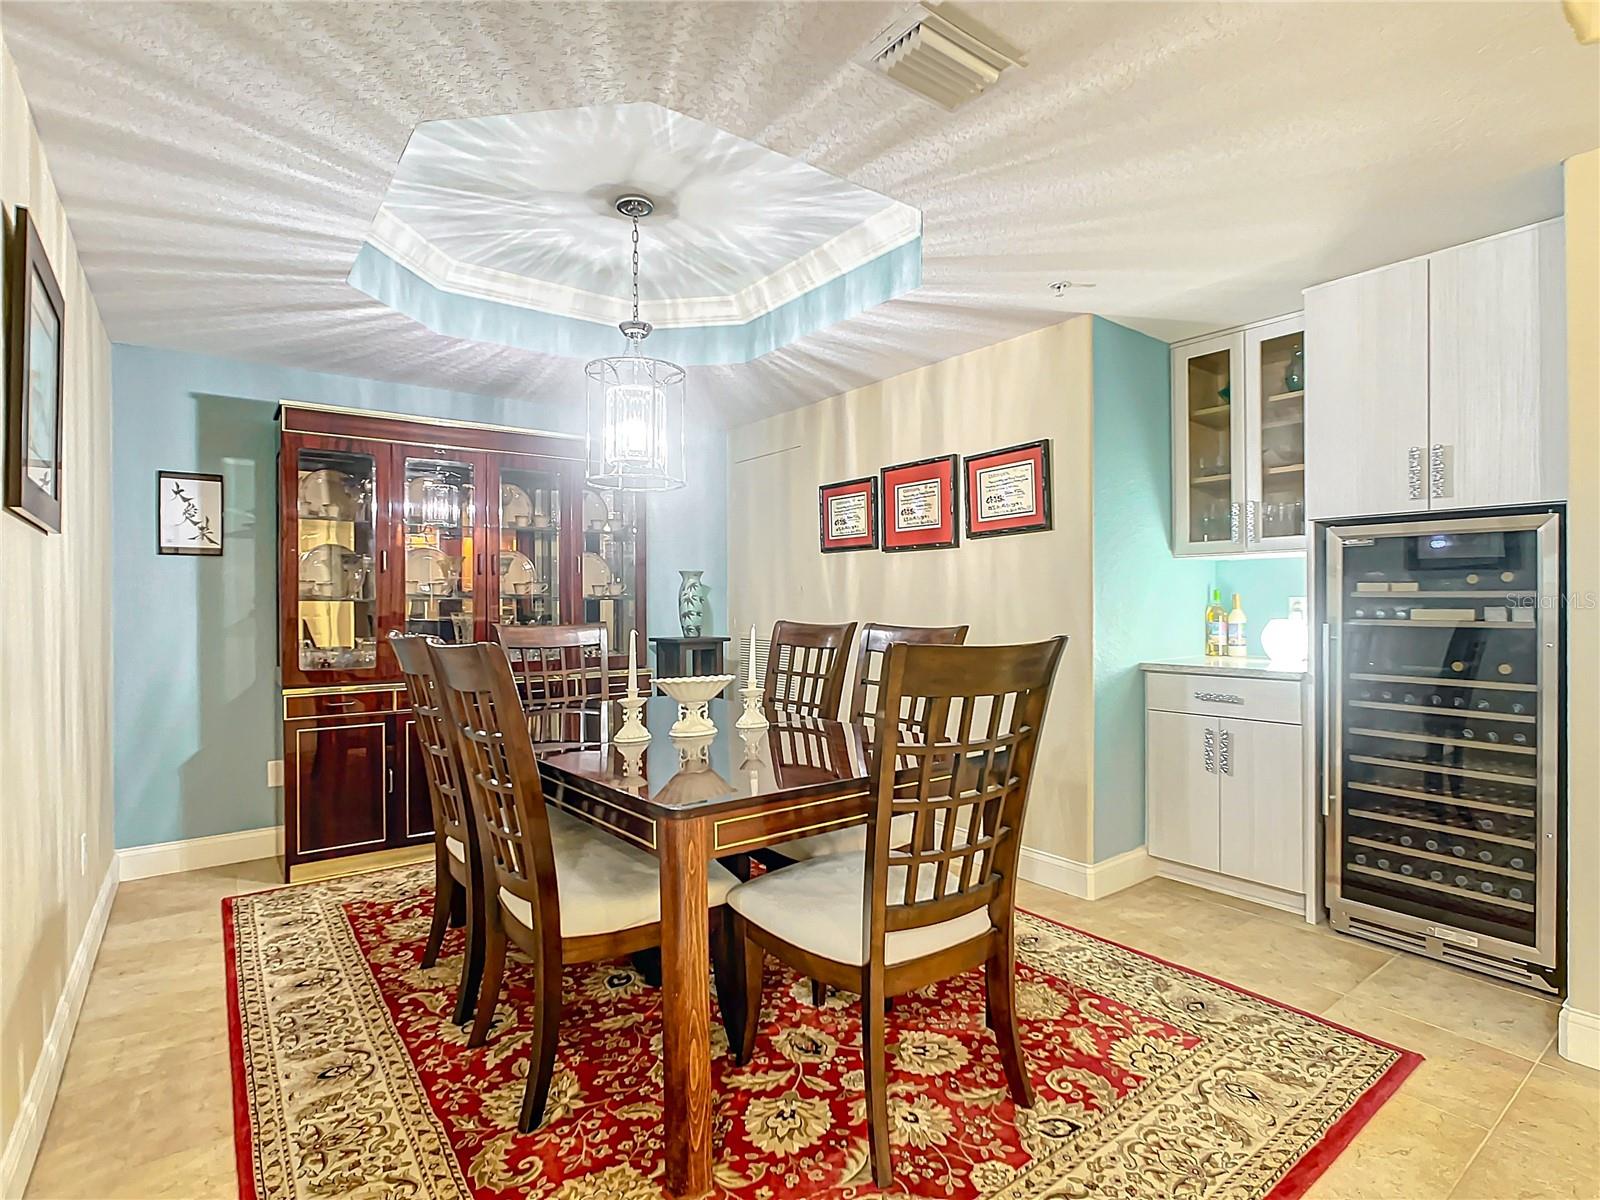 Your dining room is spacious with a 128 bottle wine cooler and dry bar.  Notice the coffered ceiling above